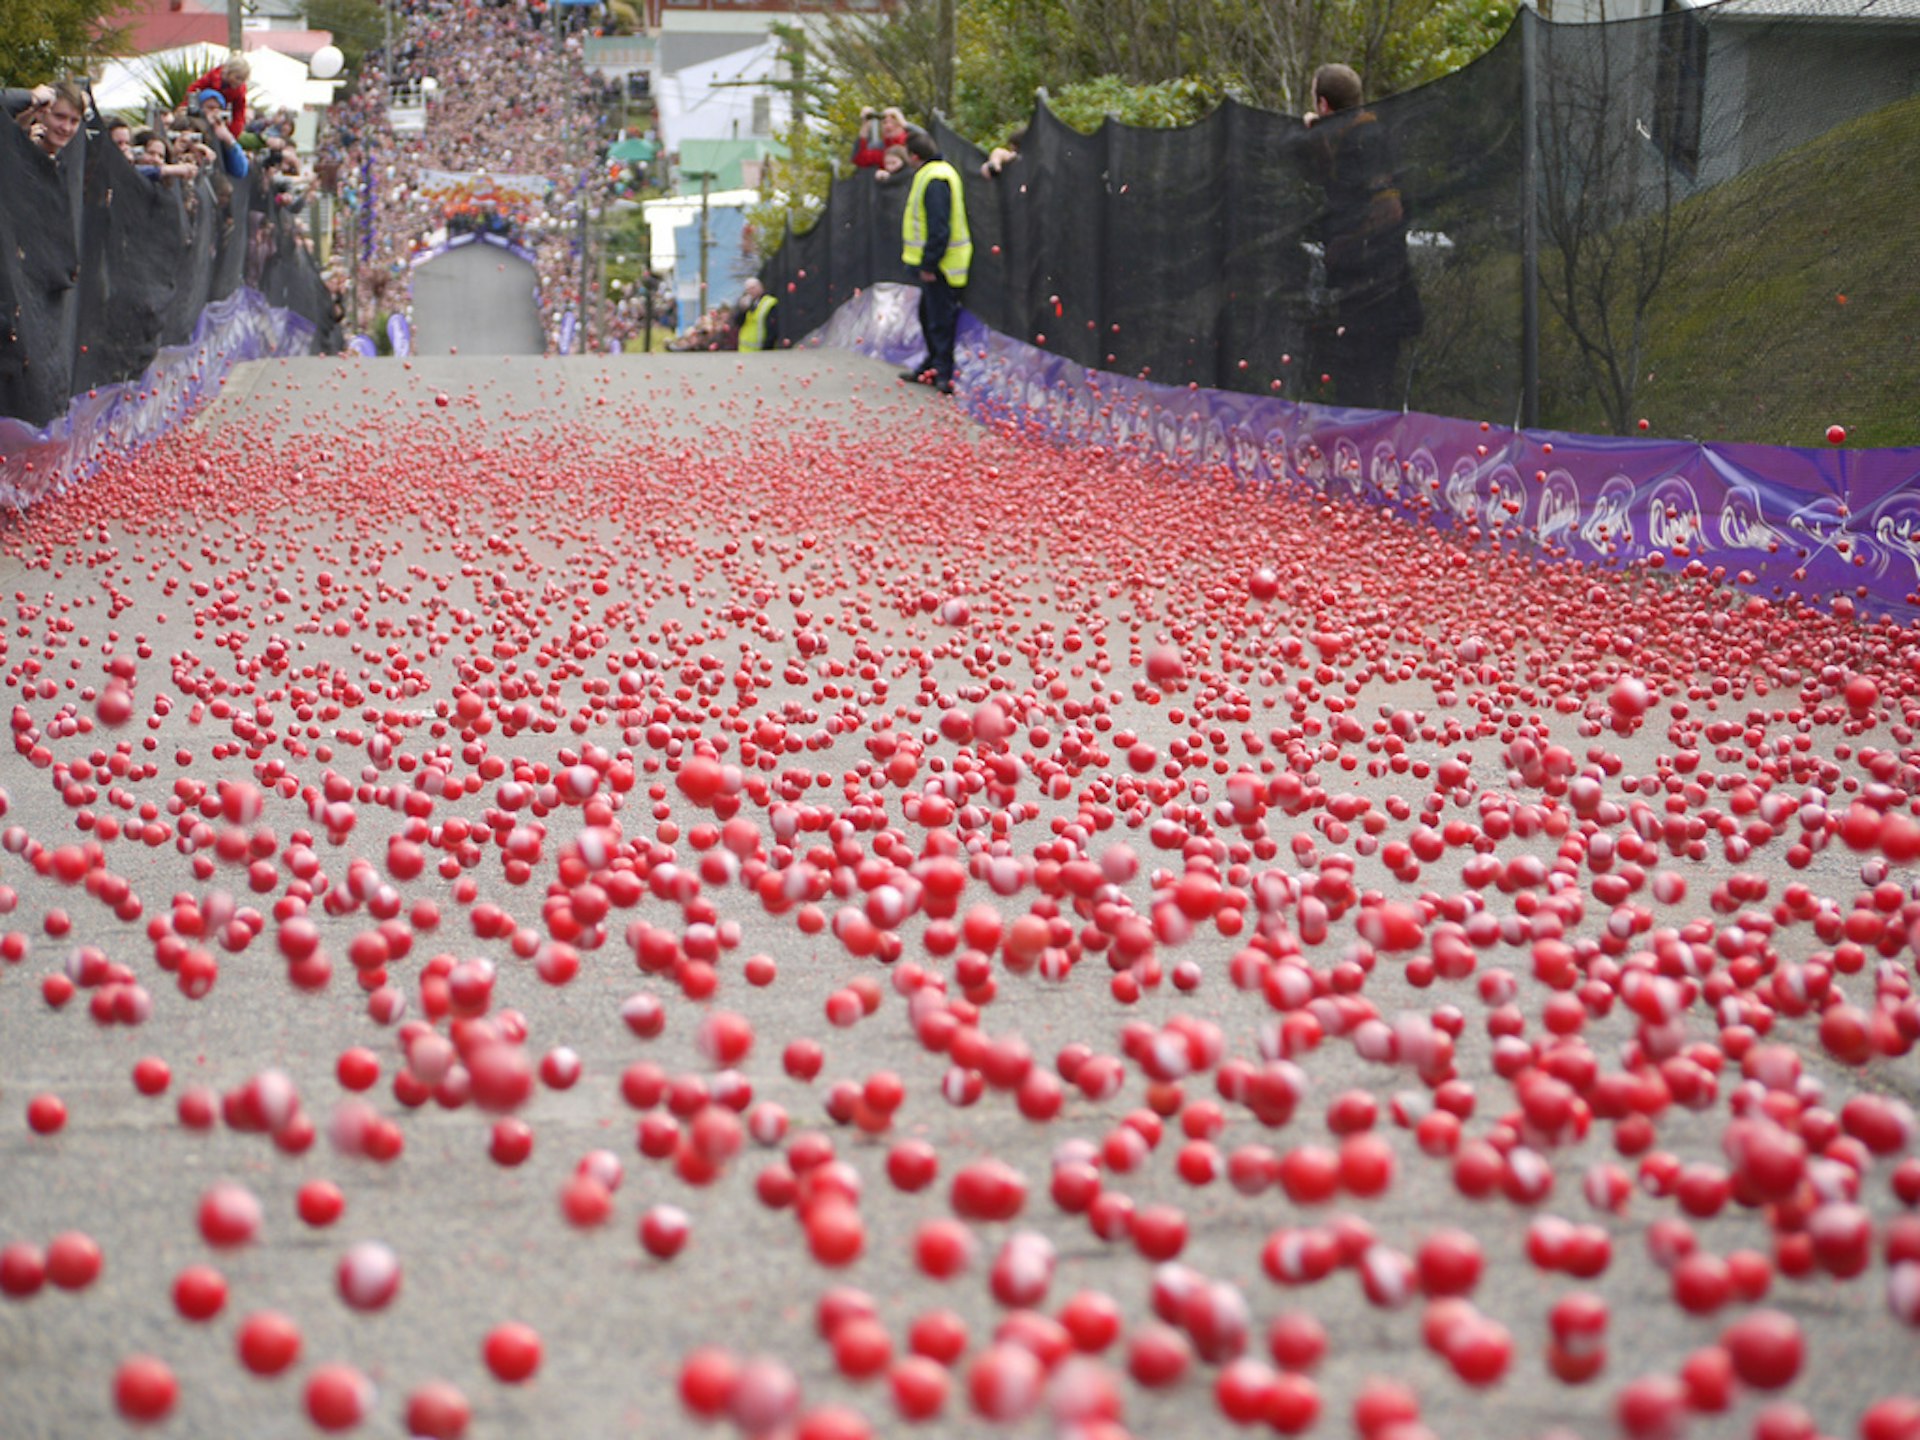 Racing Jaffas (red coated confectionery) down the world's tallest street in Dunedin. Image by Dunedin NZ / CC BY ND 2.0